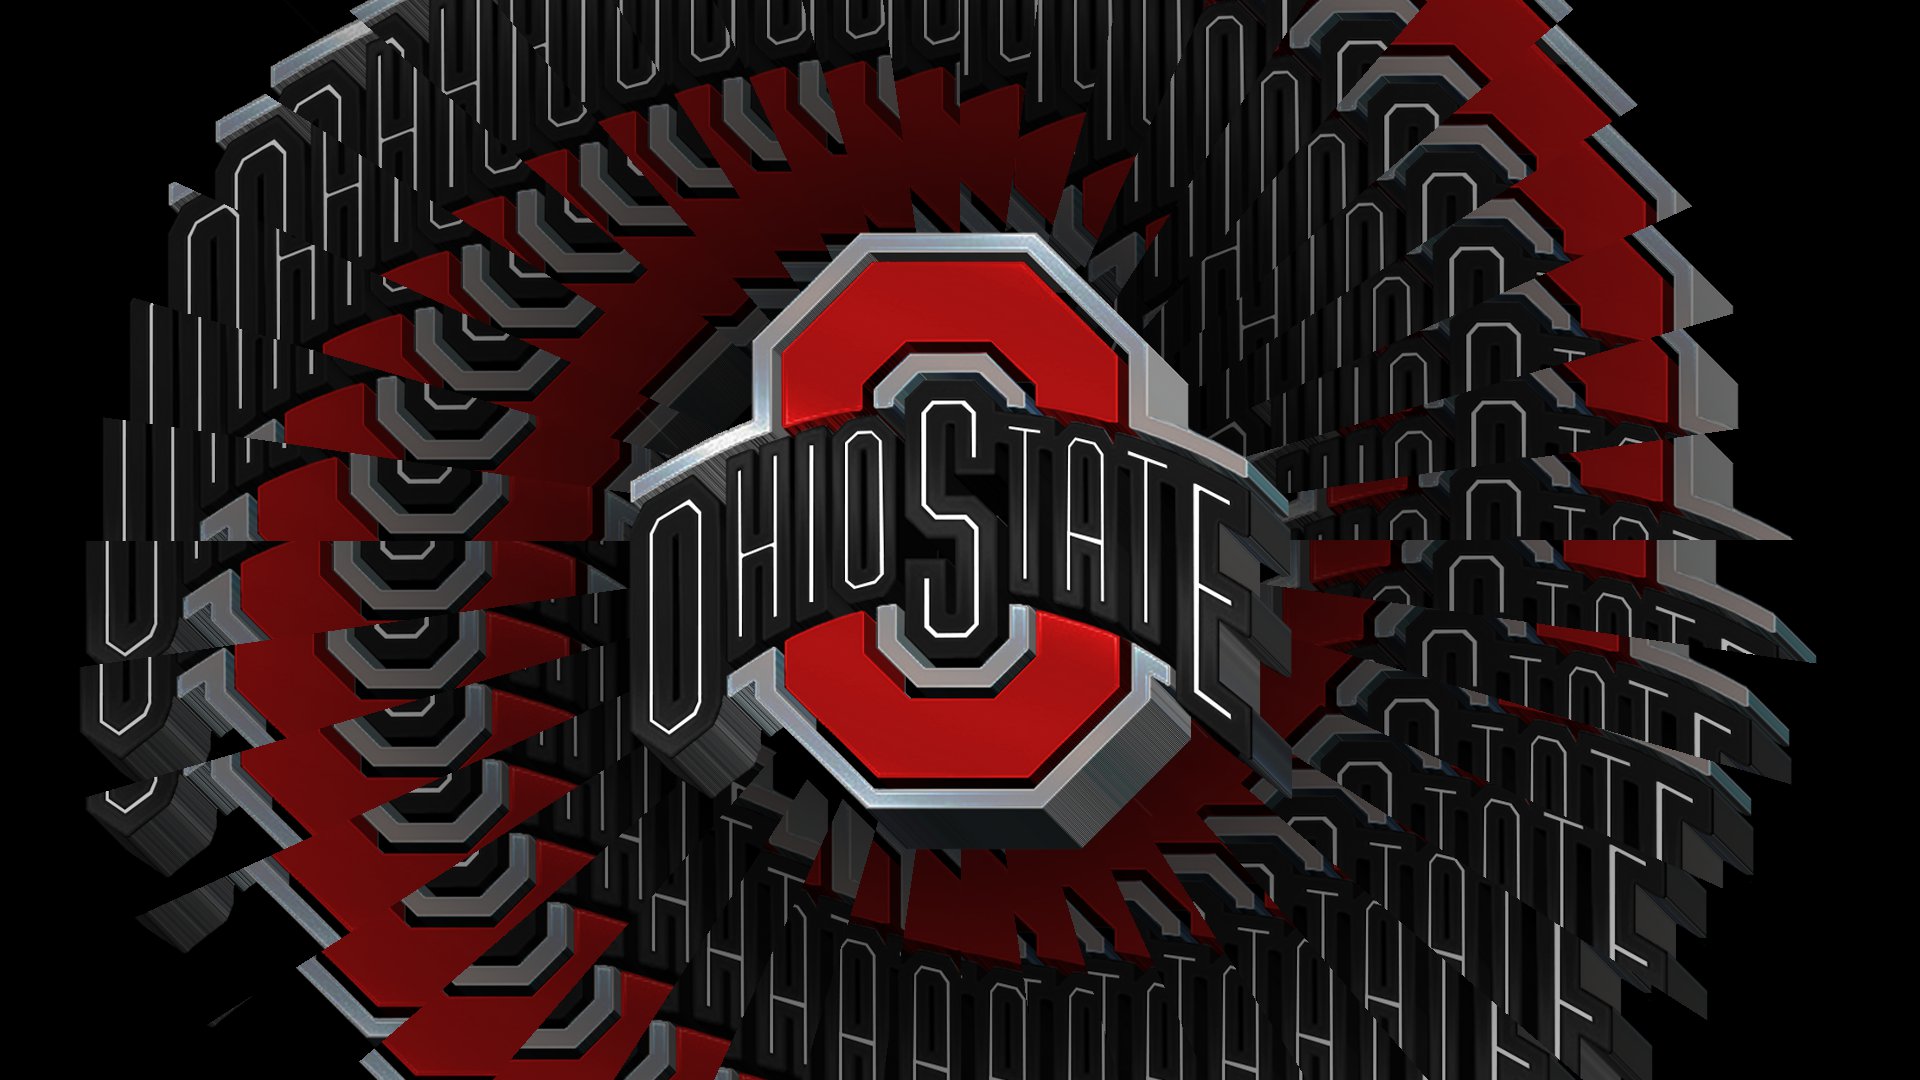 Ohio State Wallpaper And Screensaver Clubs